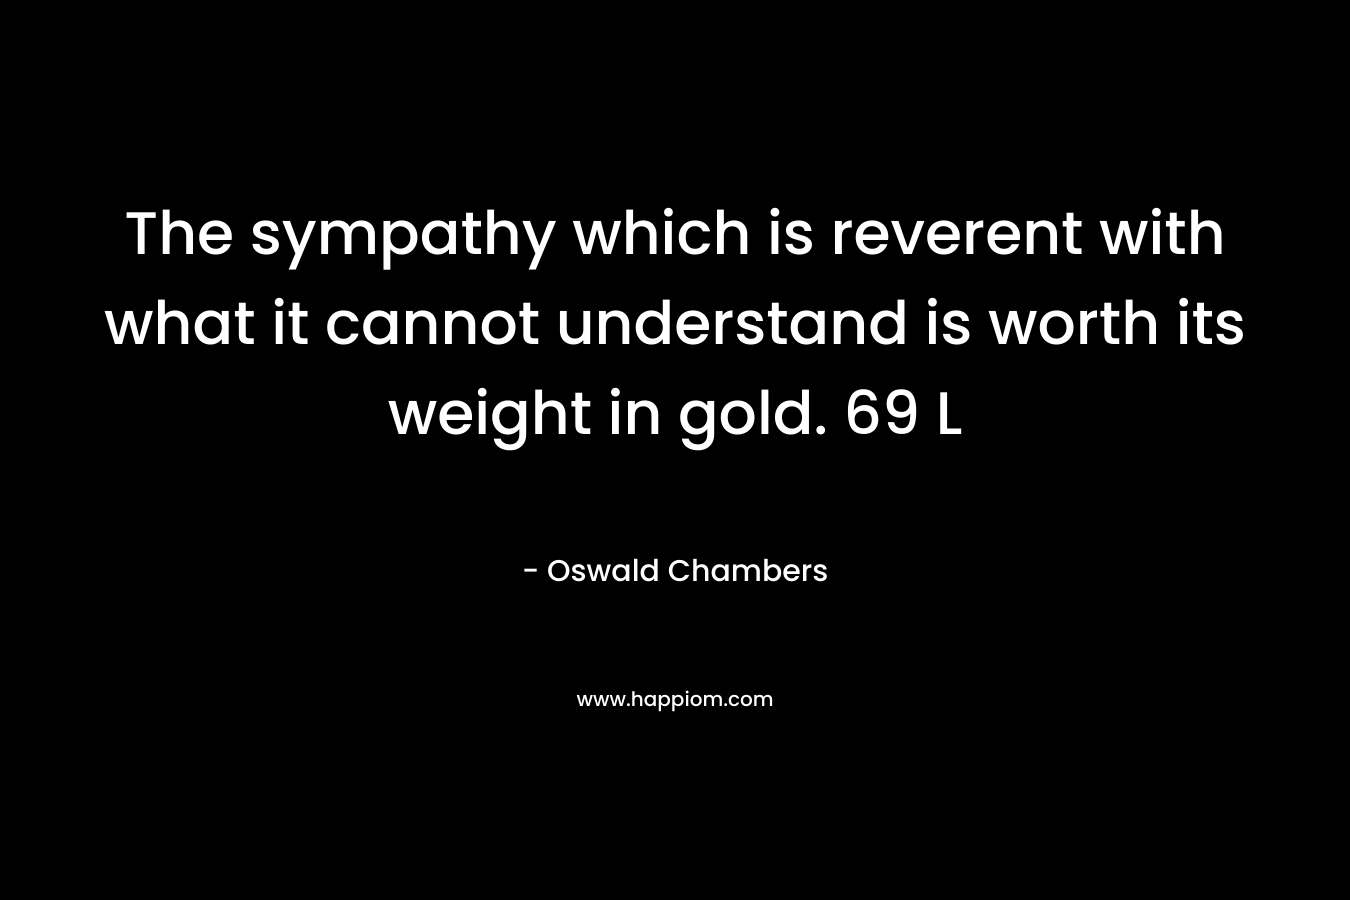 The sympathy which is reverent with what it cannot understand is worth its weight in gold. 69 L